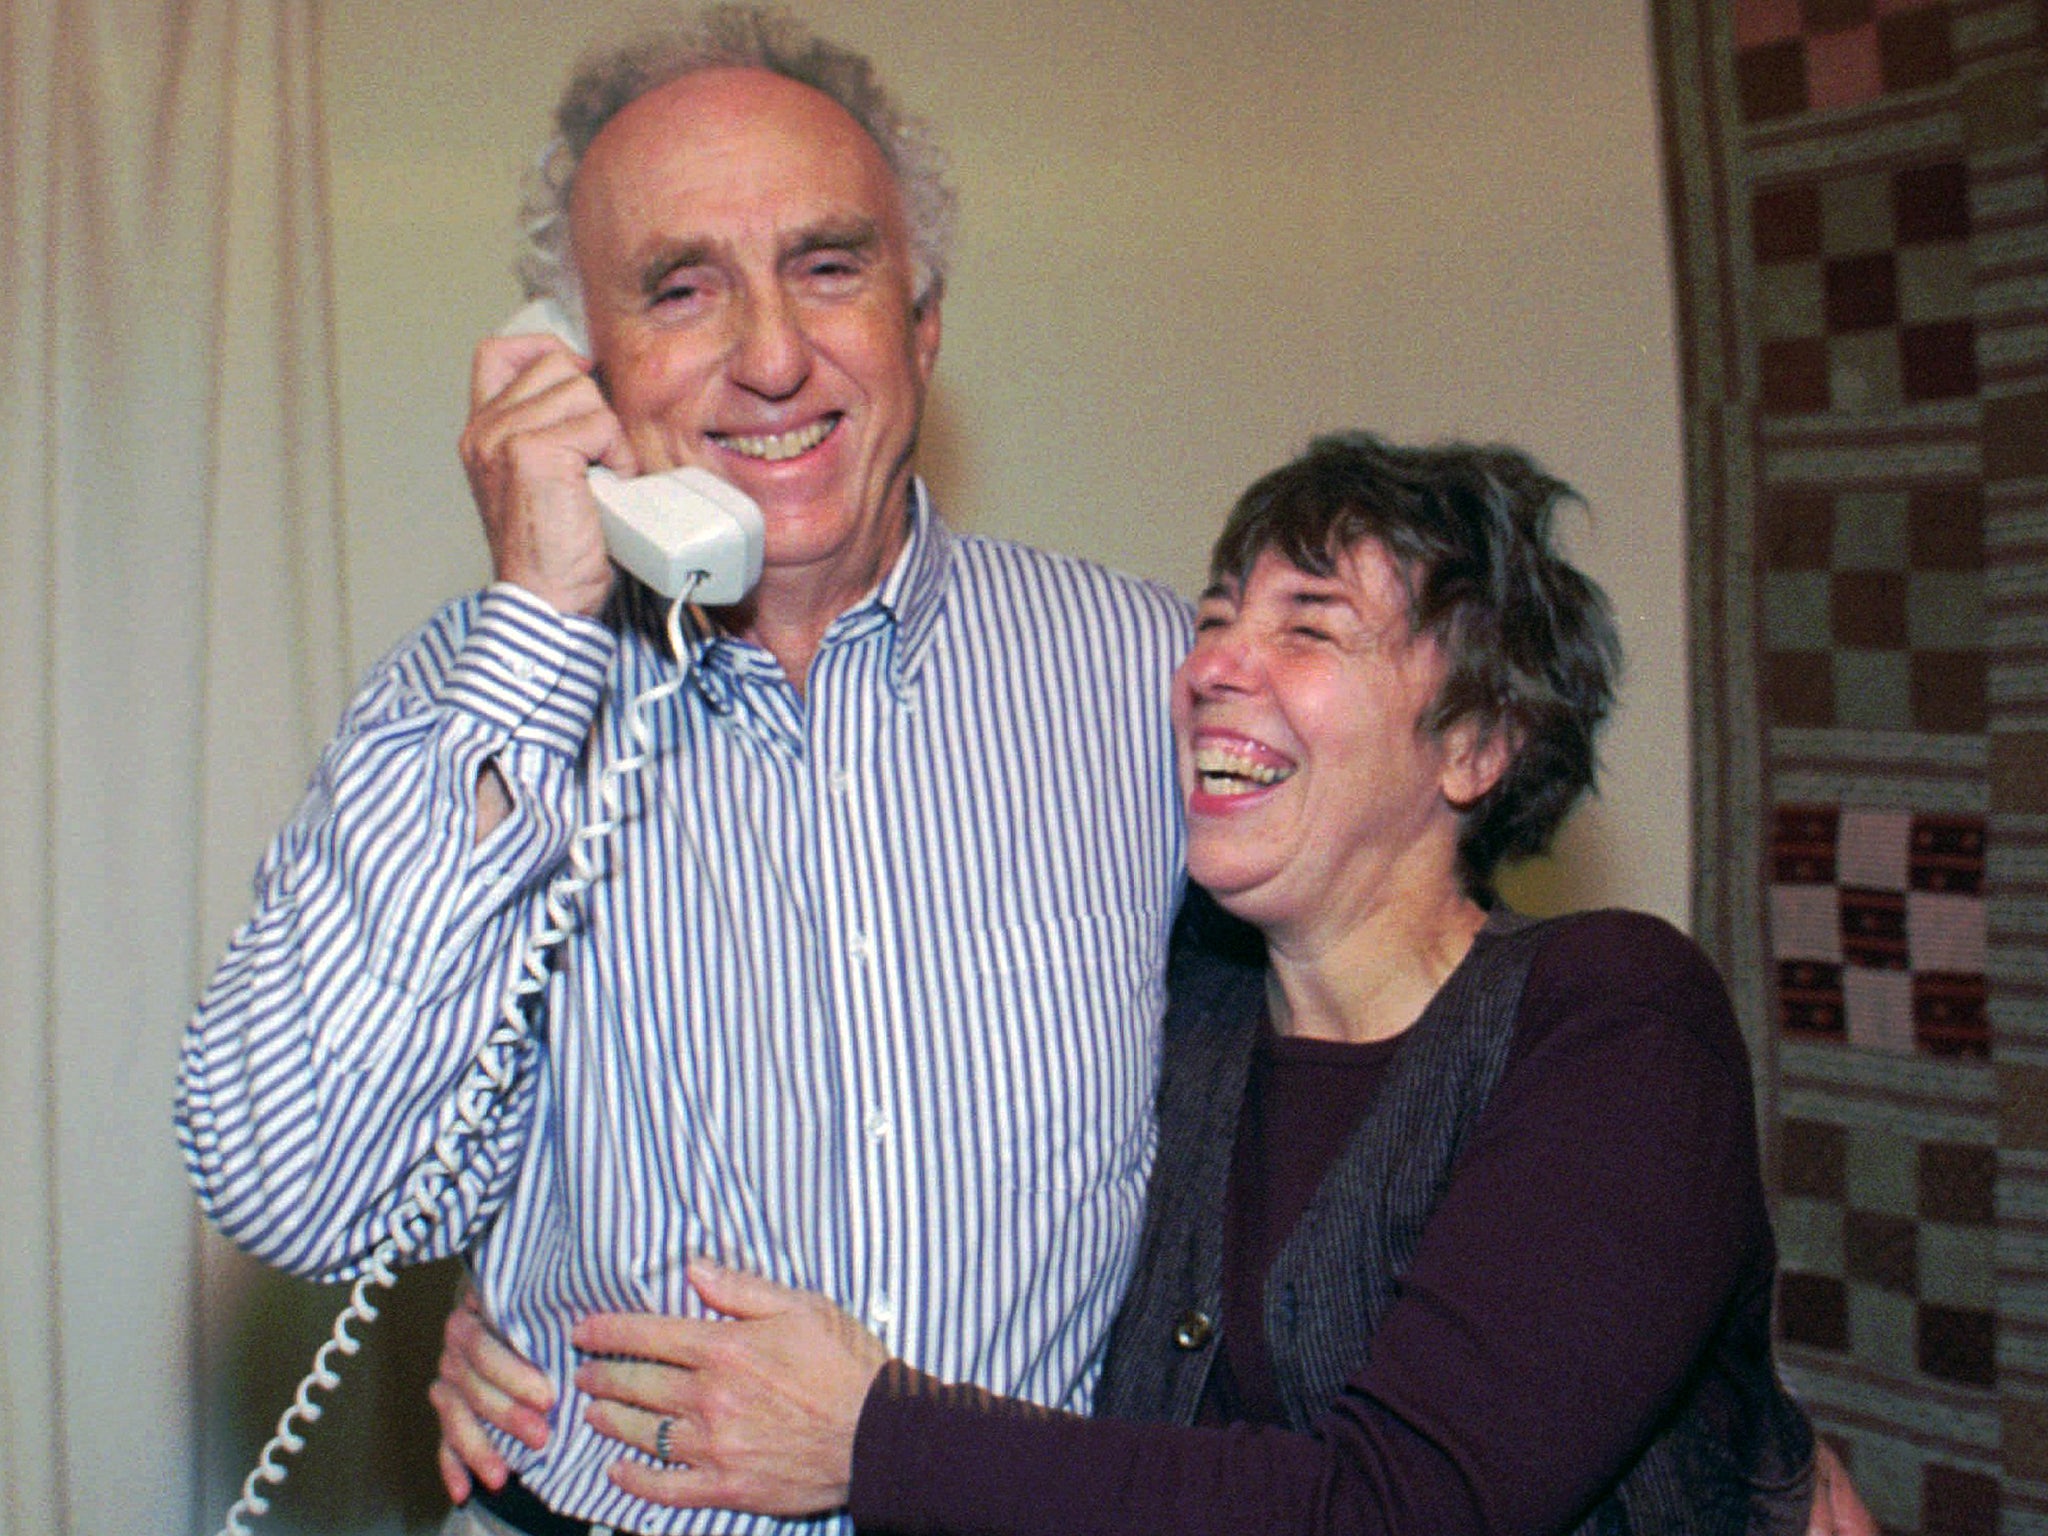 Perl with his wife receiving a congratulatory phone call following the news of his Nobel Prize win